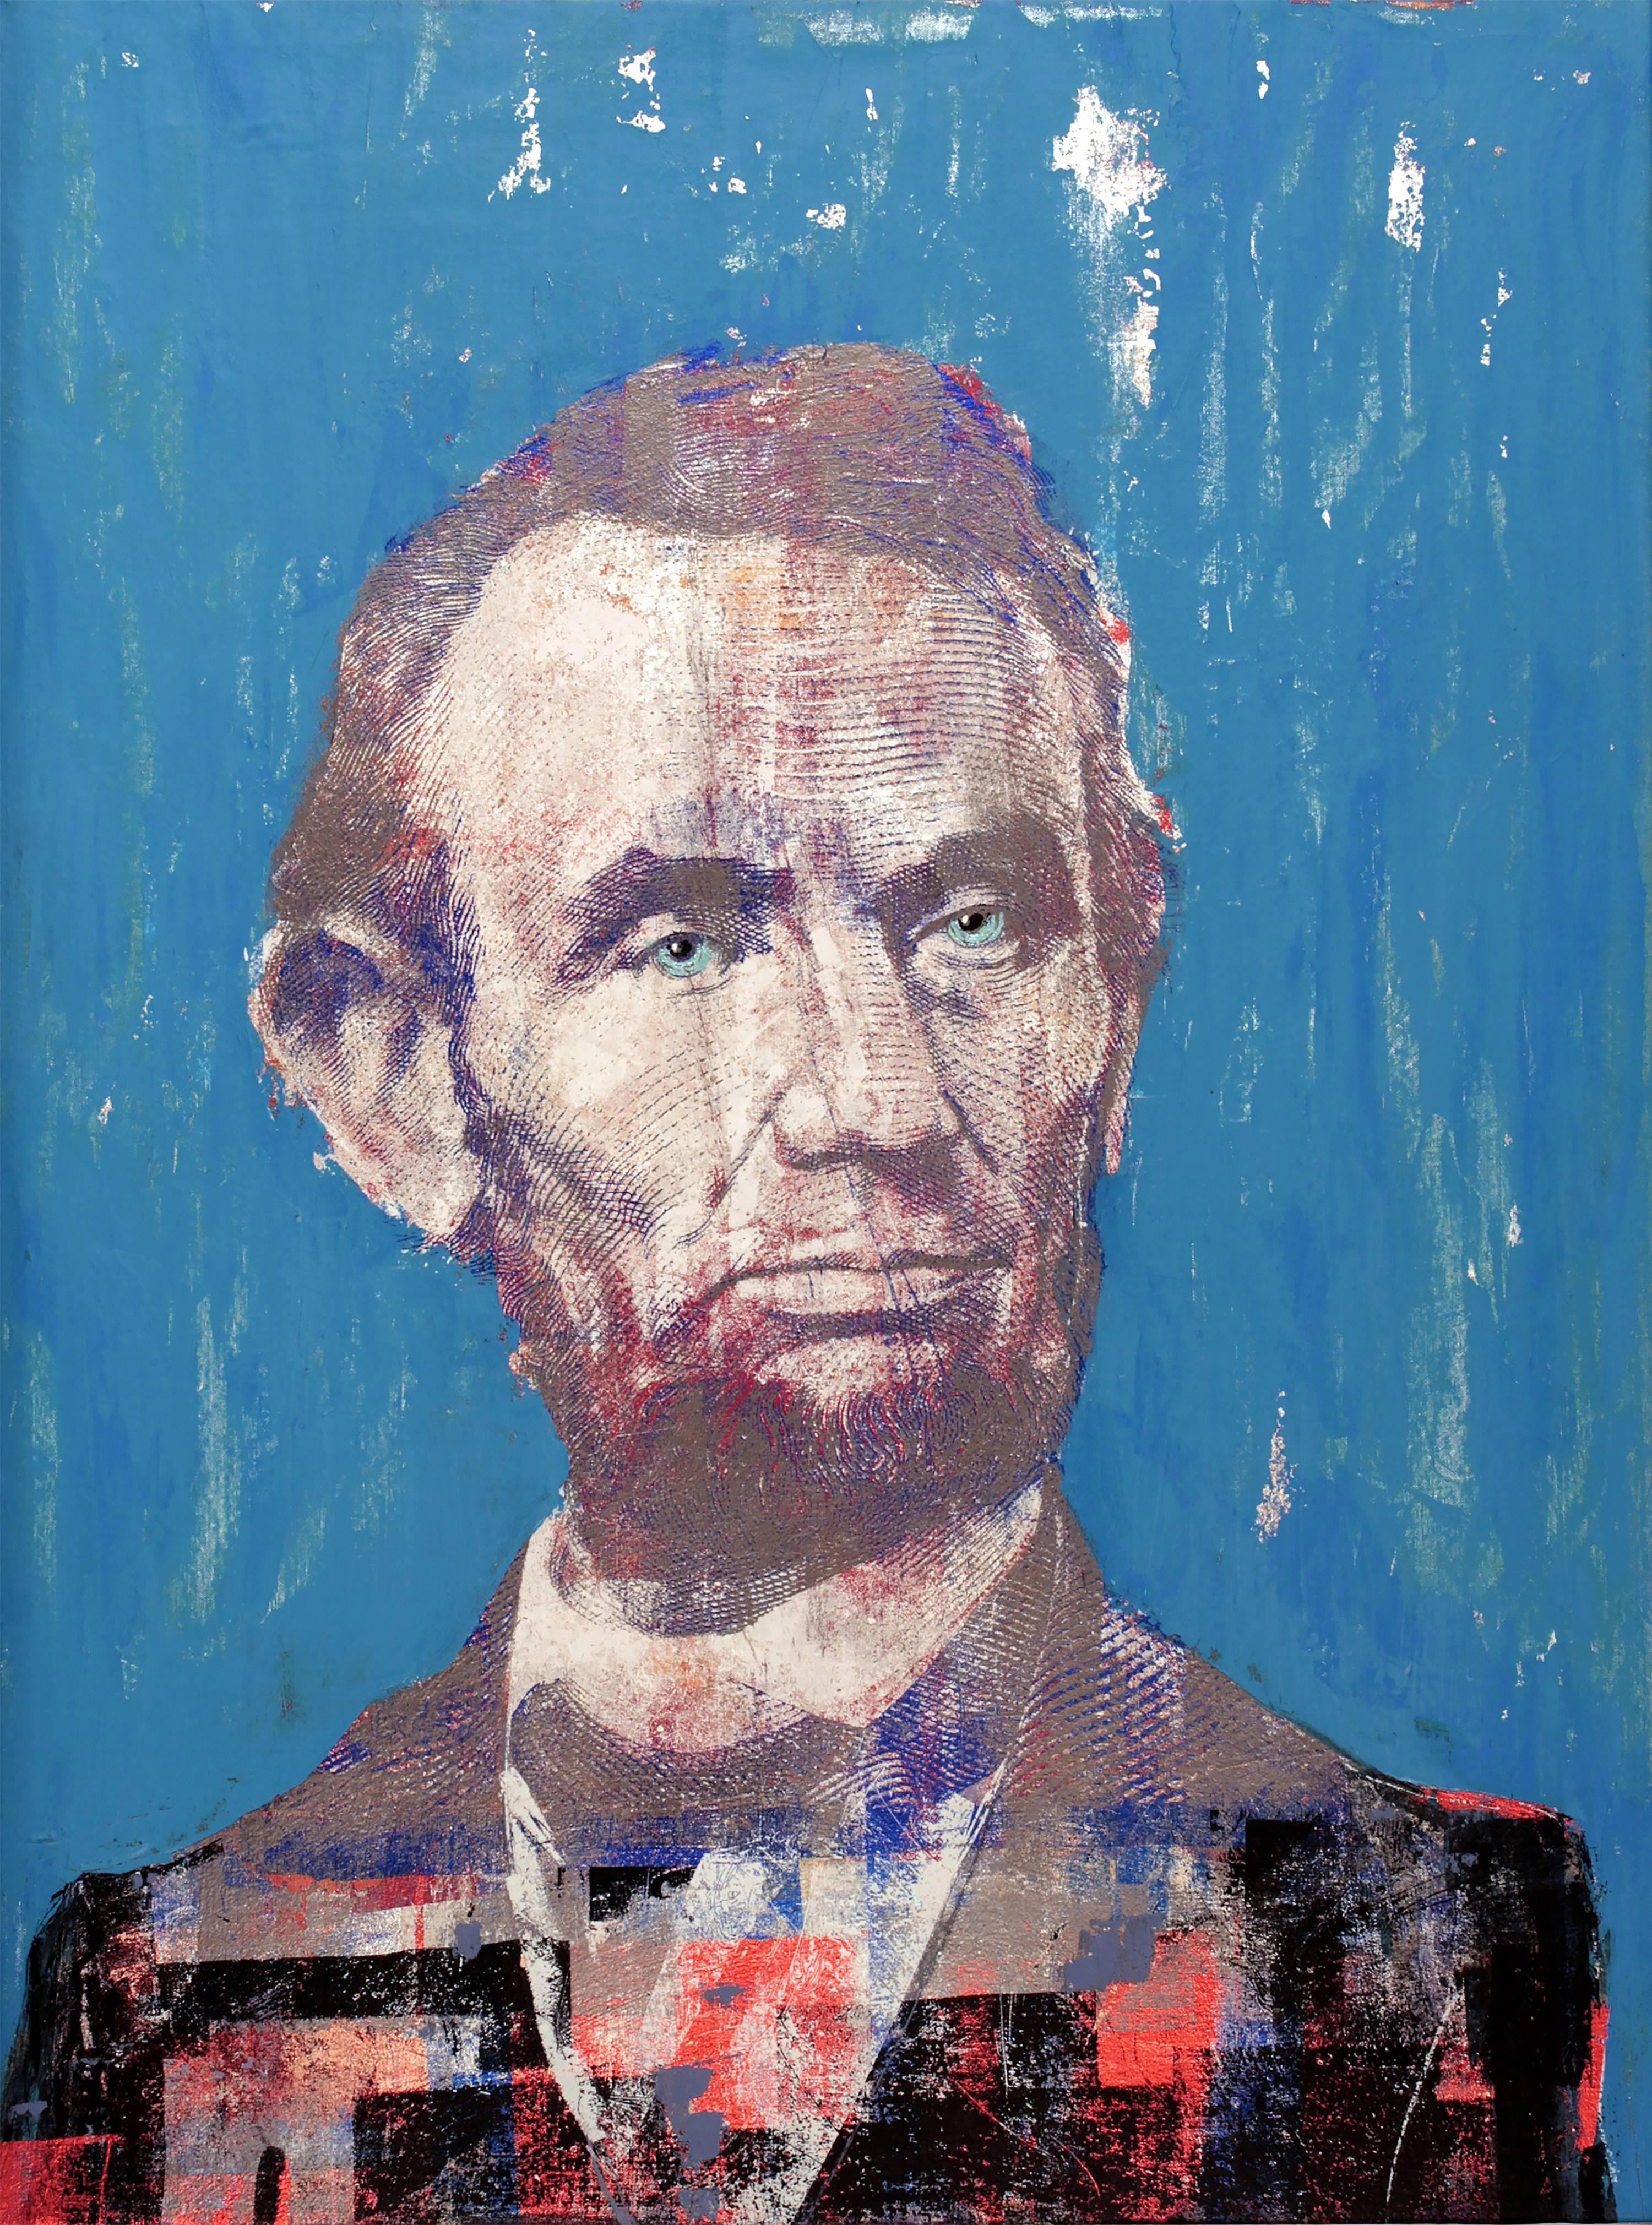 $5 Abe Lincoln - Painting by Houben R.T.